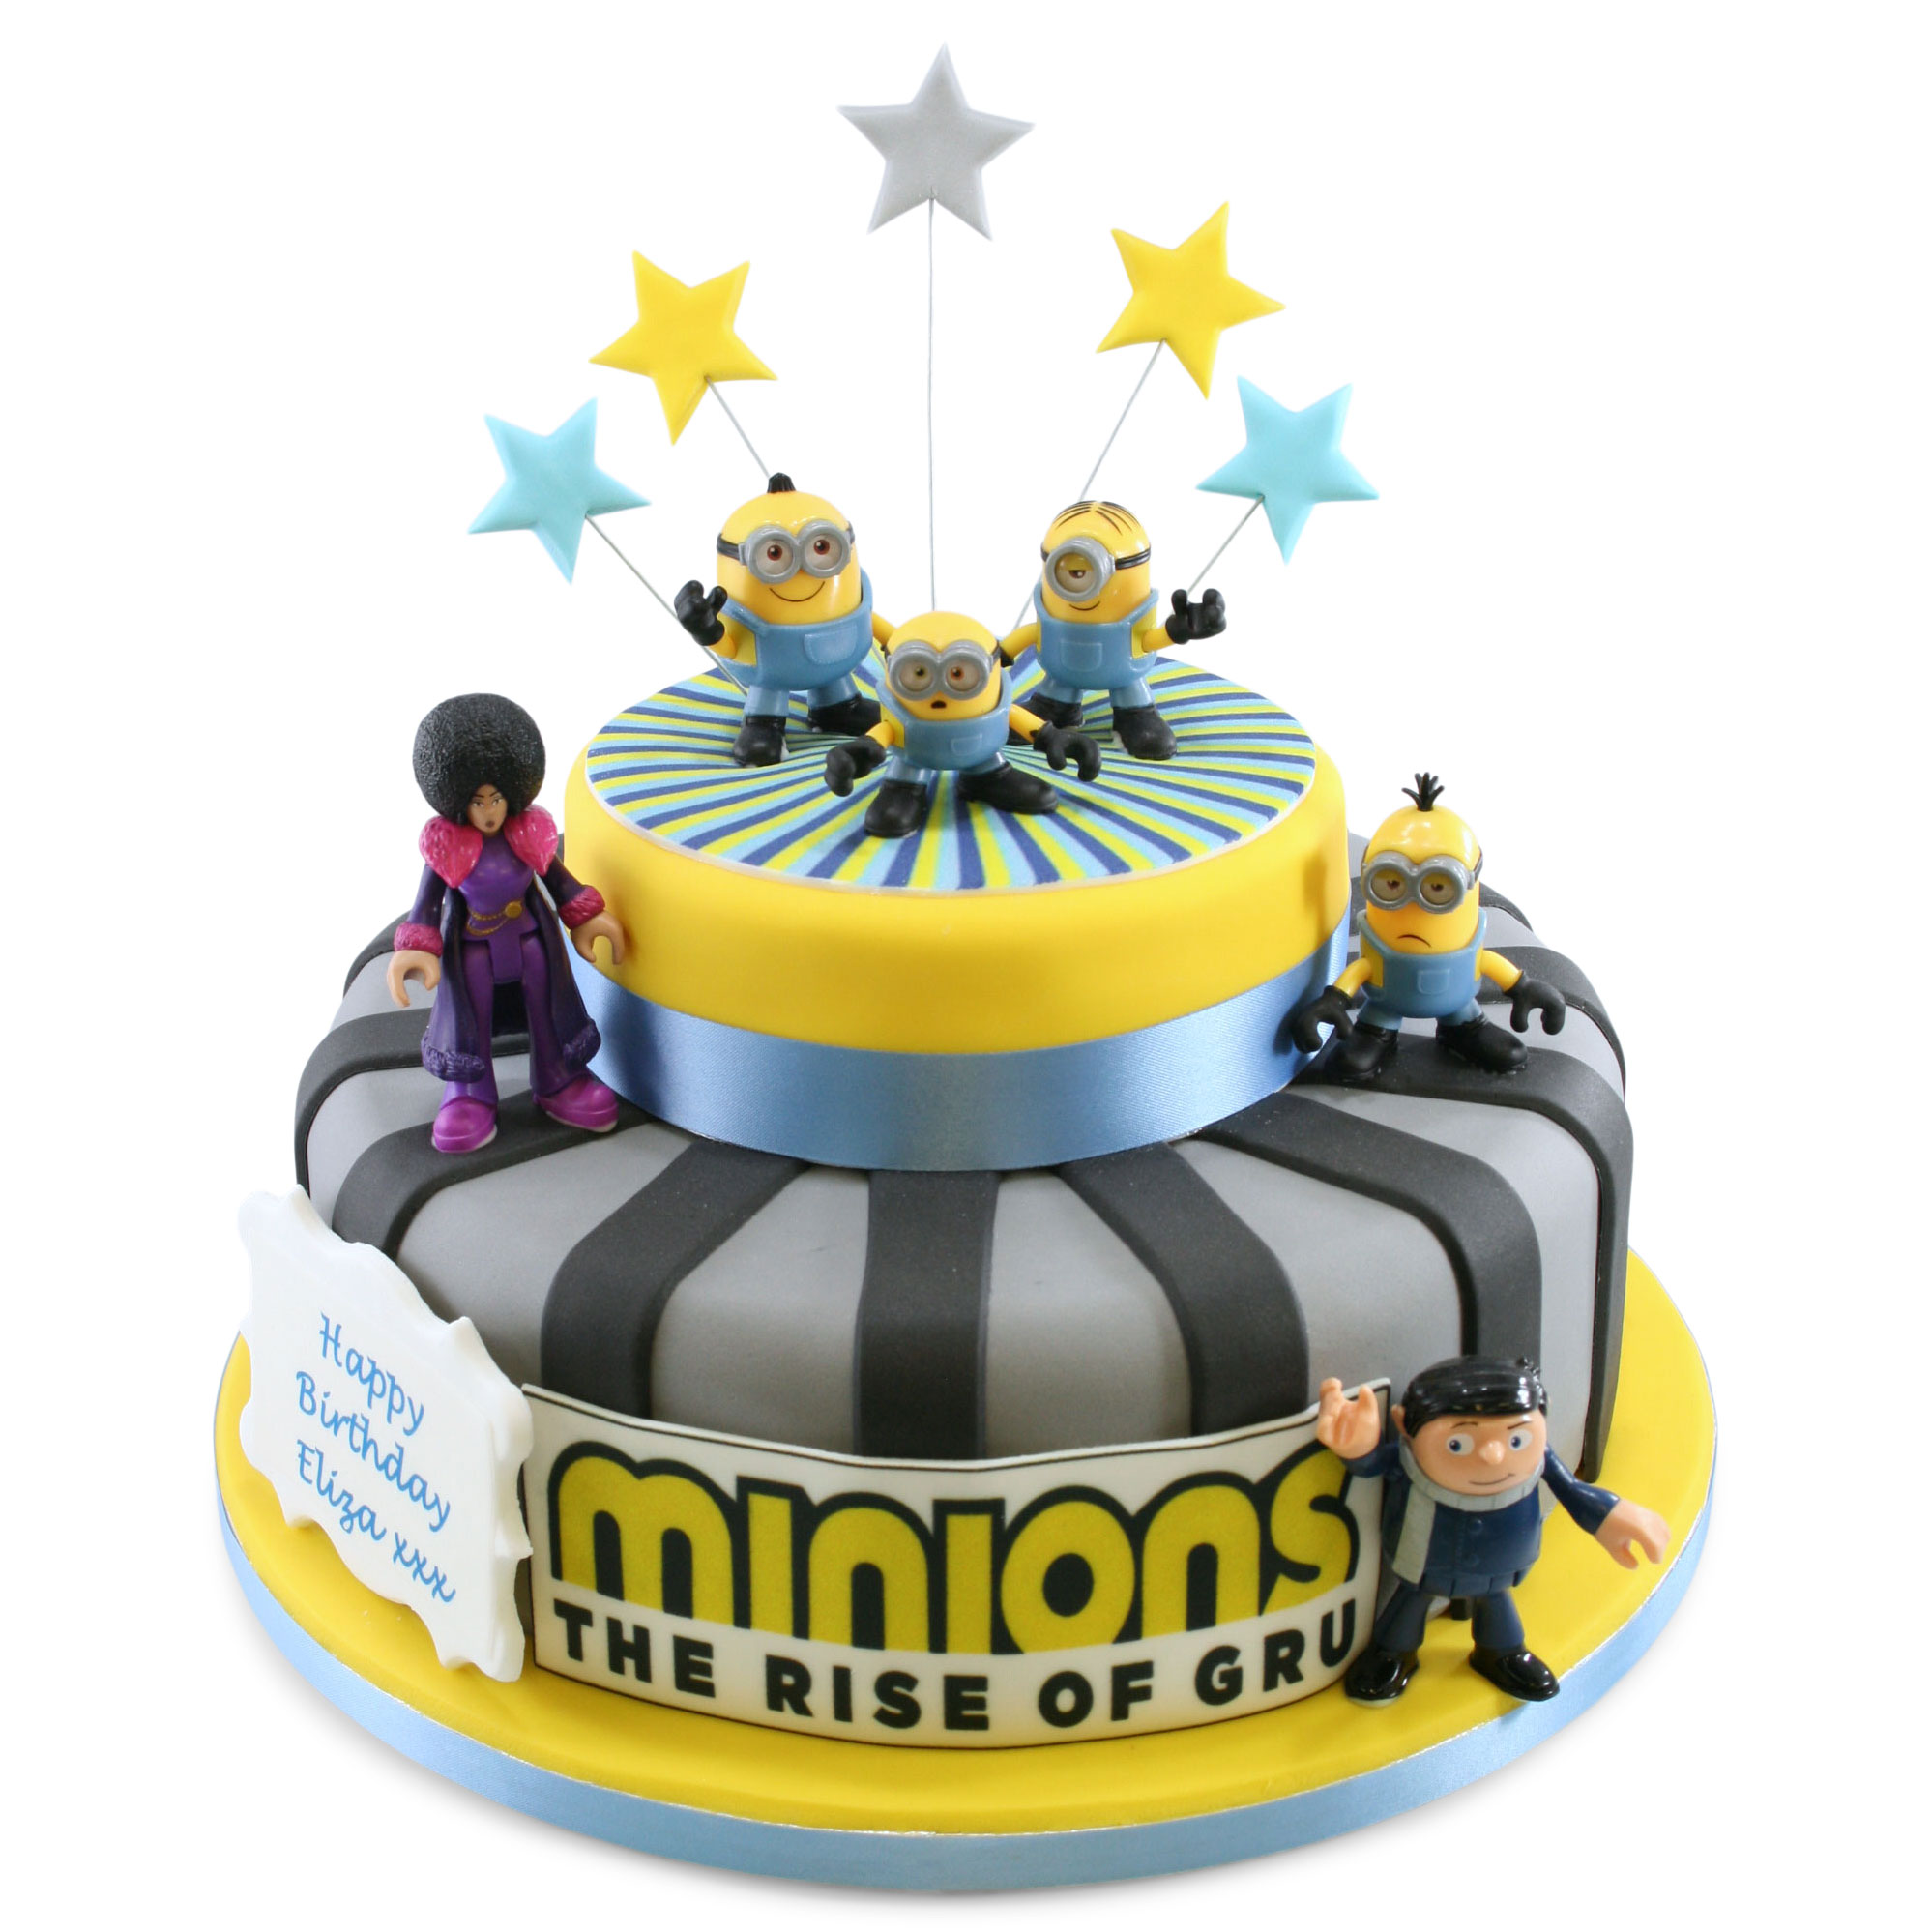 Segovia Desserts - 2 tier Minion birthday cake. Buttercream frosting w/  fondant decorations and toy topper. | Facebook